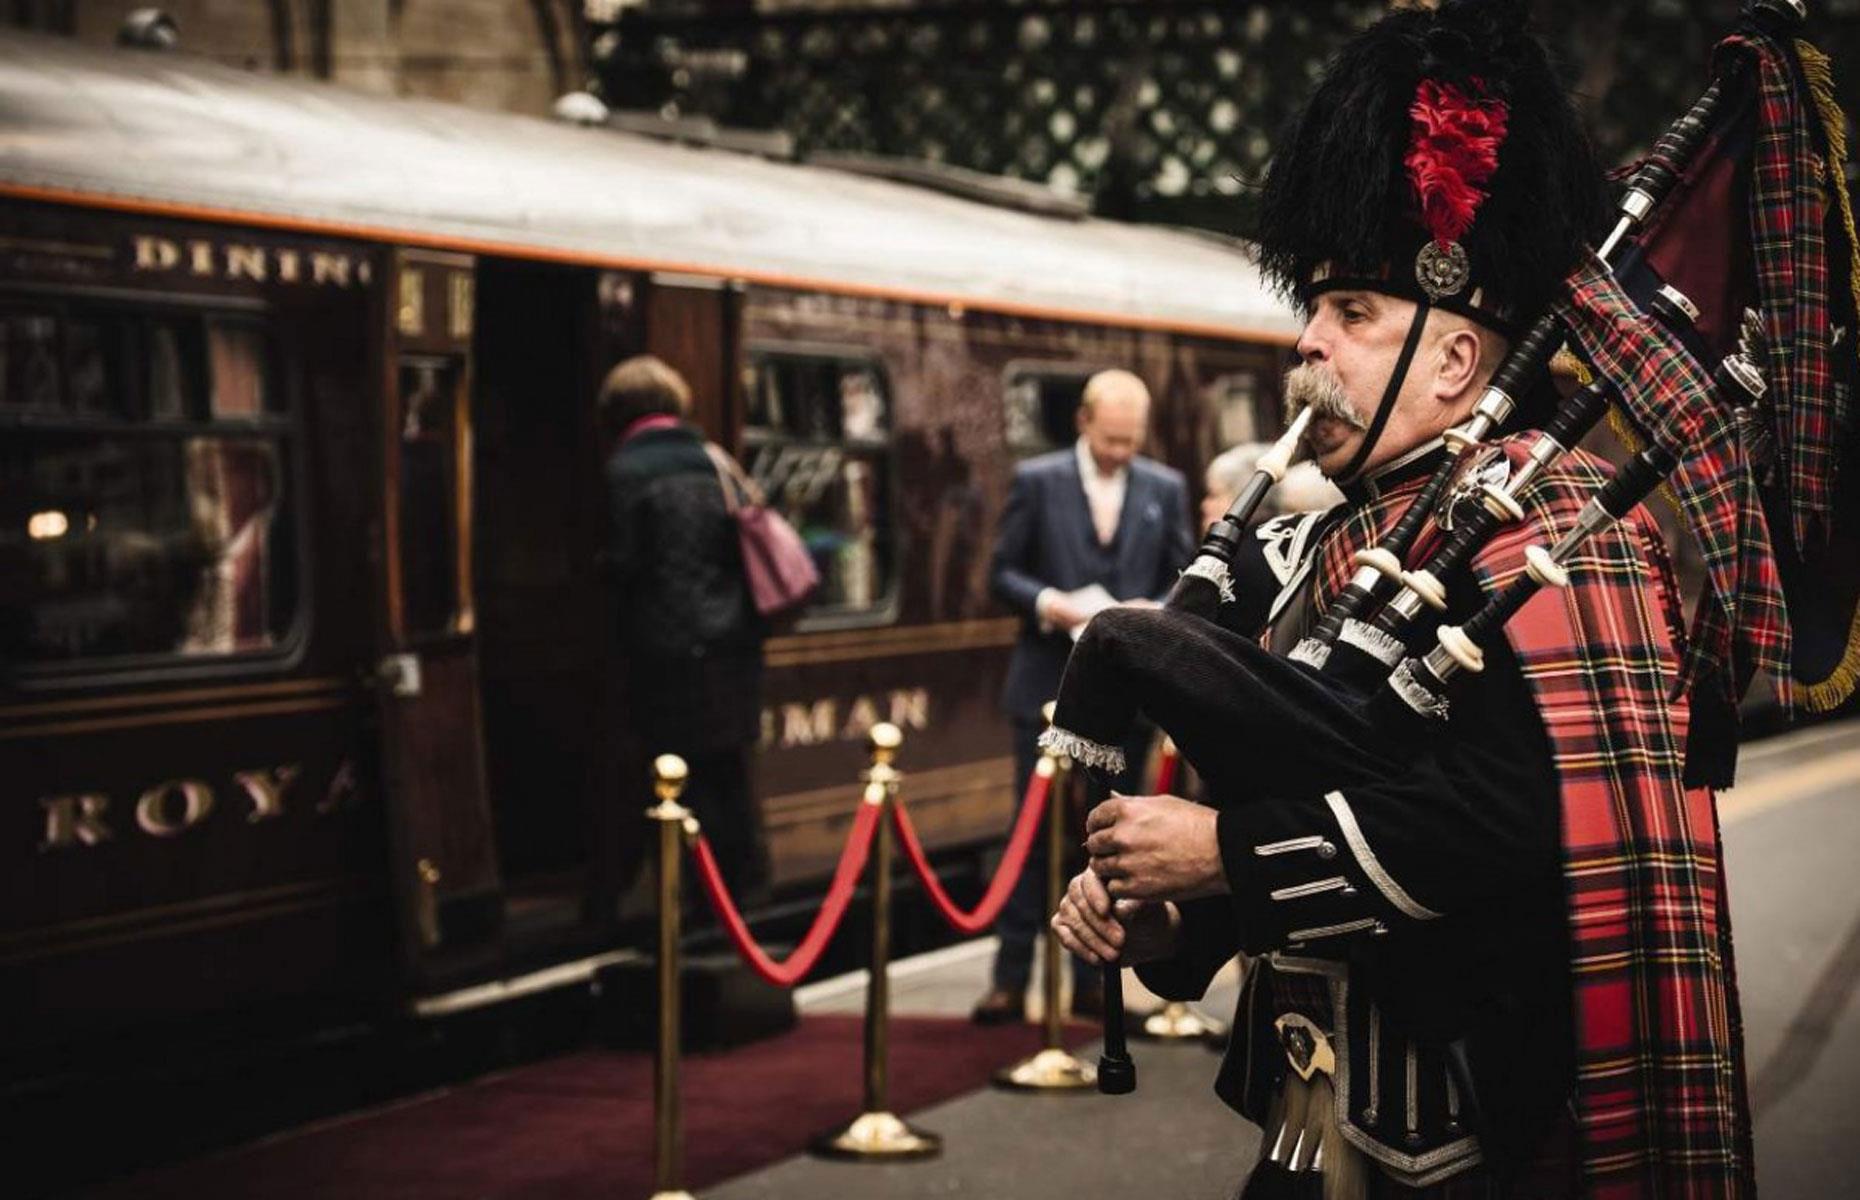 <p>Another jewel in Belmond's crown, the <em>Royal Scotsman</em> has been traversing Caledonia's glorious Highlands and Lowlands since 1985. It now offers 12 services that depart from and return to Edinburgh.</p>  <p>Richly decorated with mahogany panelling and fine tweed and tartan furnishings, the train's carriages include two dining cars where the onboard chefs work magic with the finest Scottish ingredients, such as Aberdeen Angus beef and wild salmon.</p>